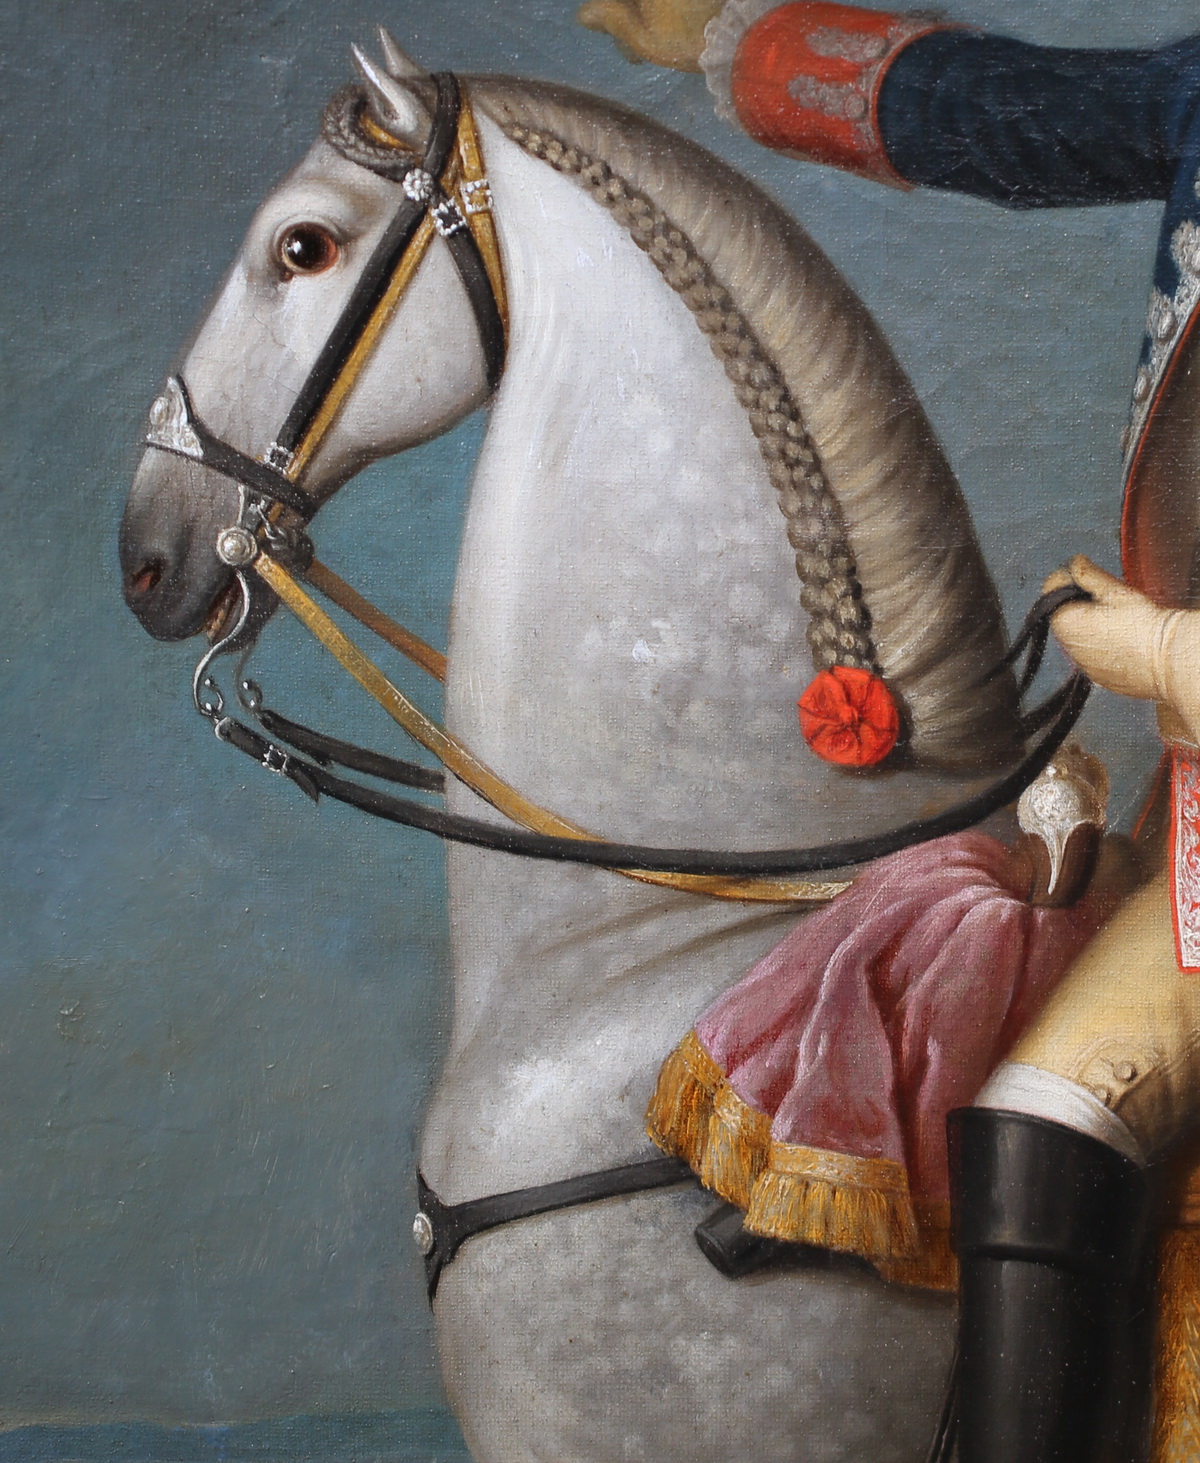 French school of the 18th century, equestrian portrait 